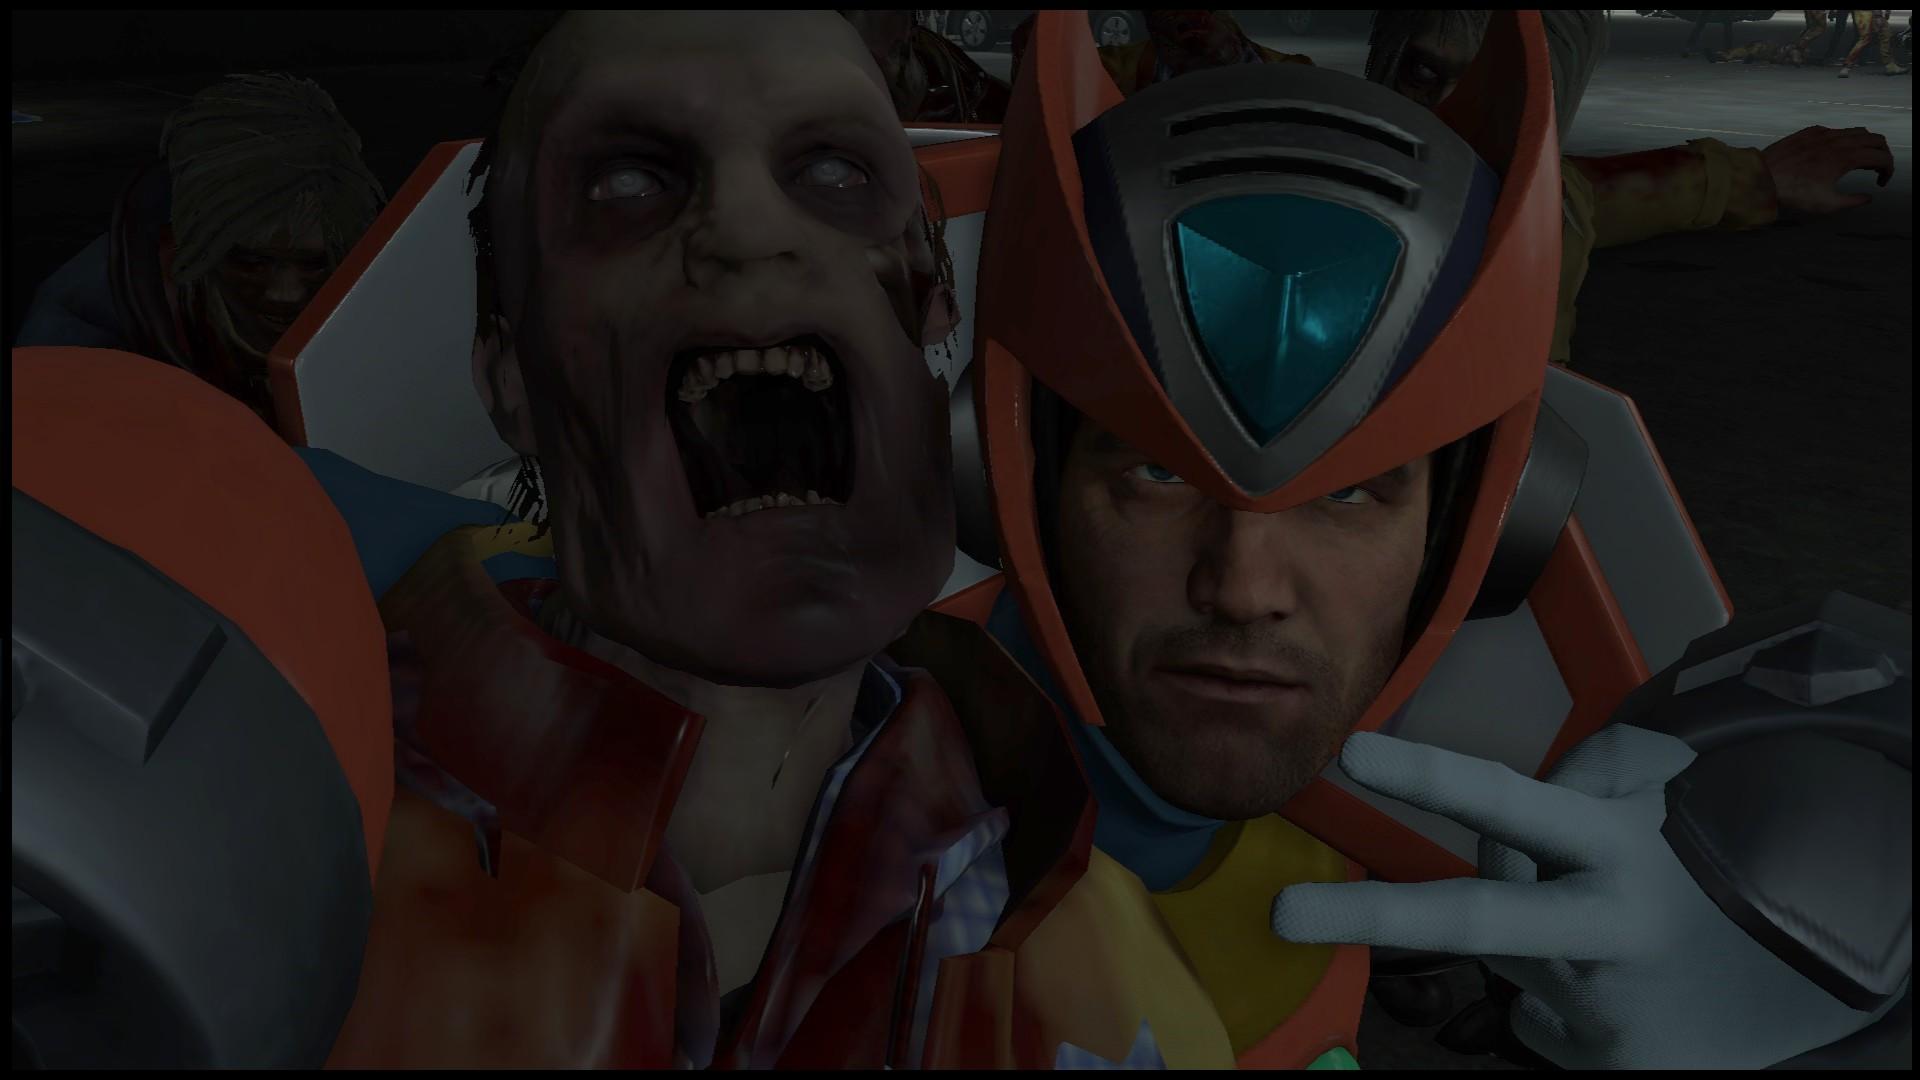 Review: With 'Dead Rising 4,' We've Reached Peak Zombie